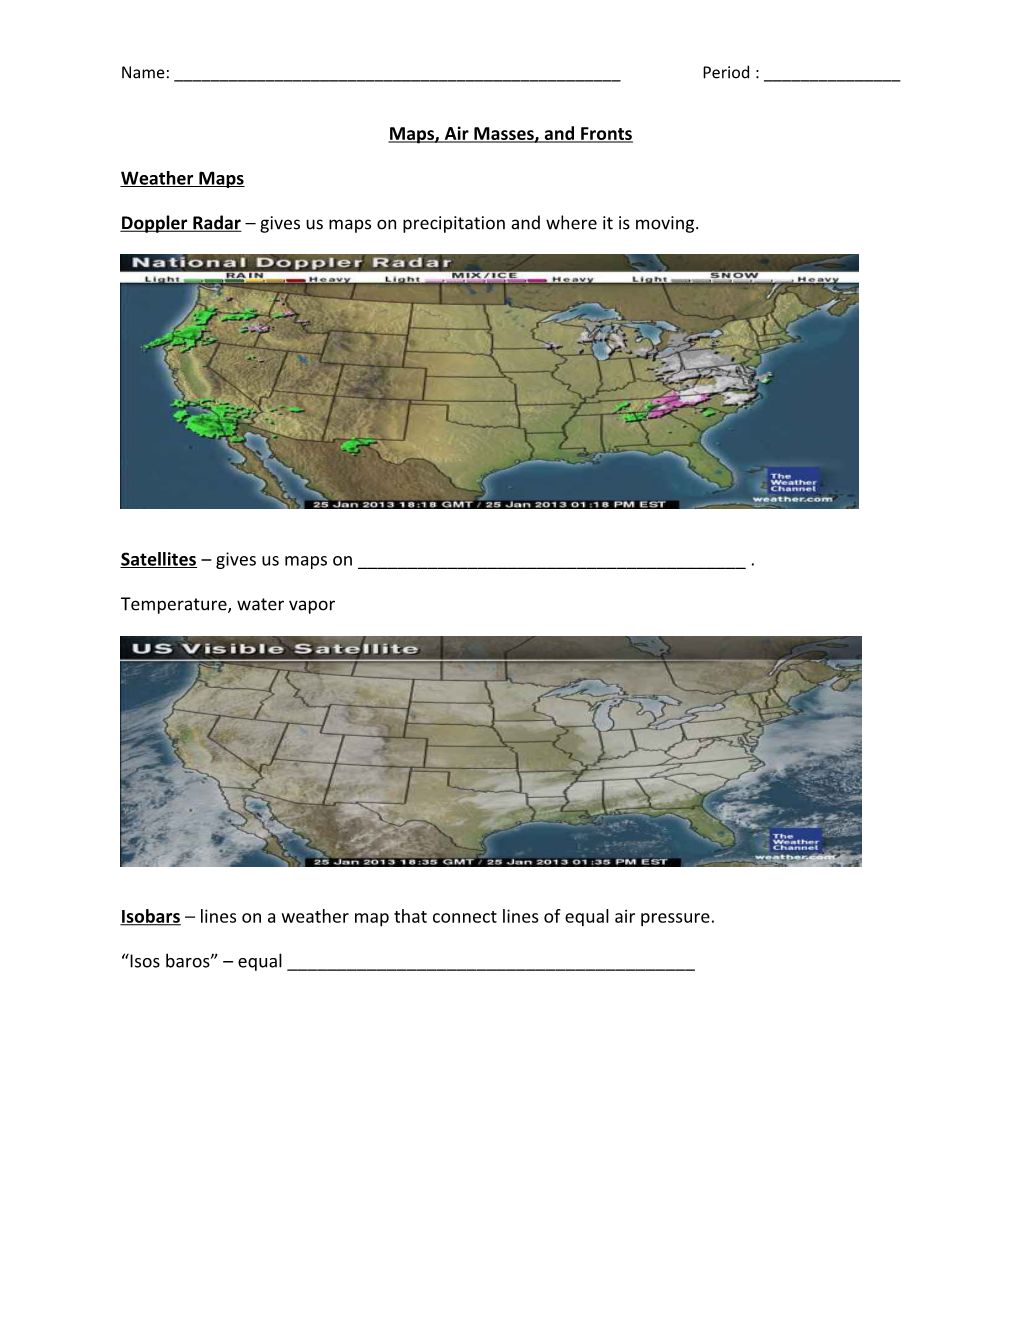 Maps, Air Masses, and Fronts